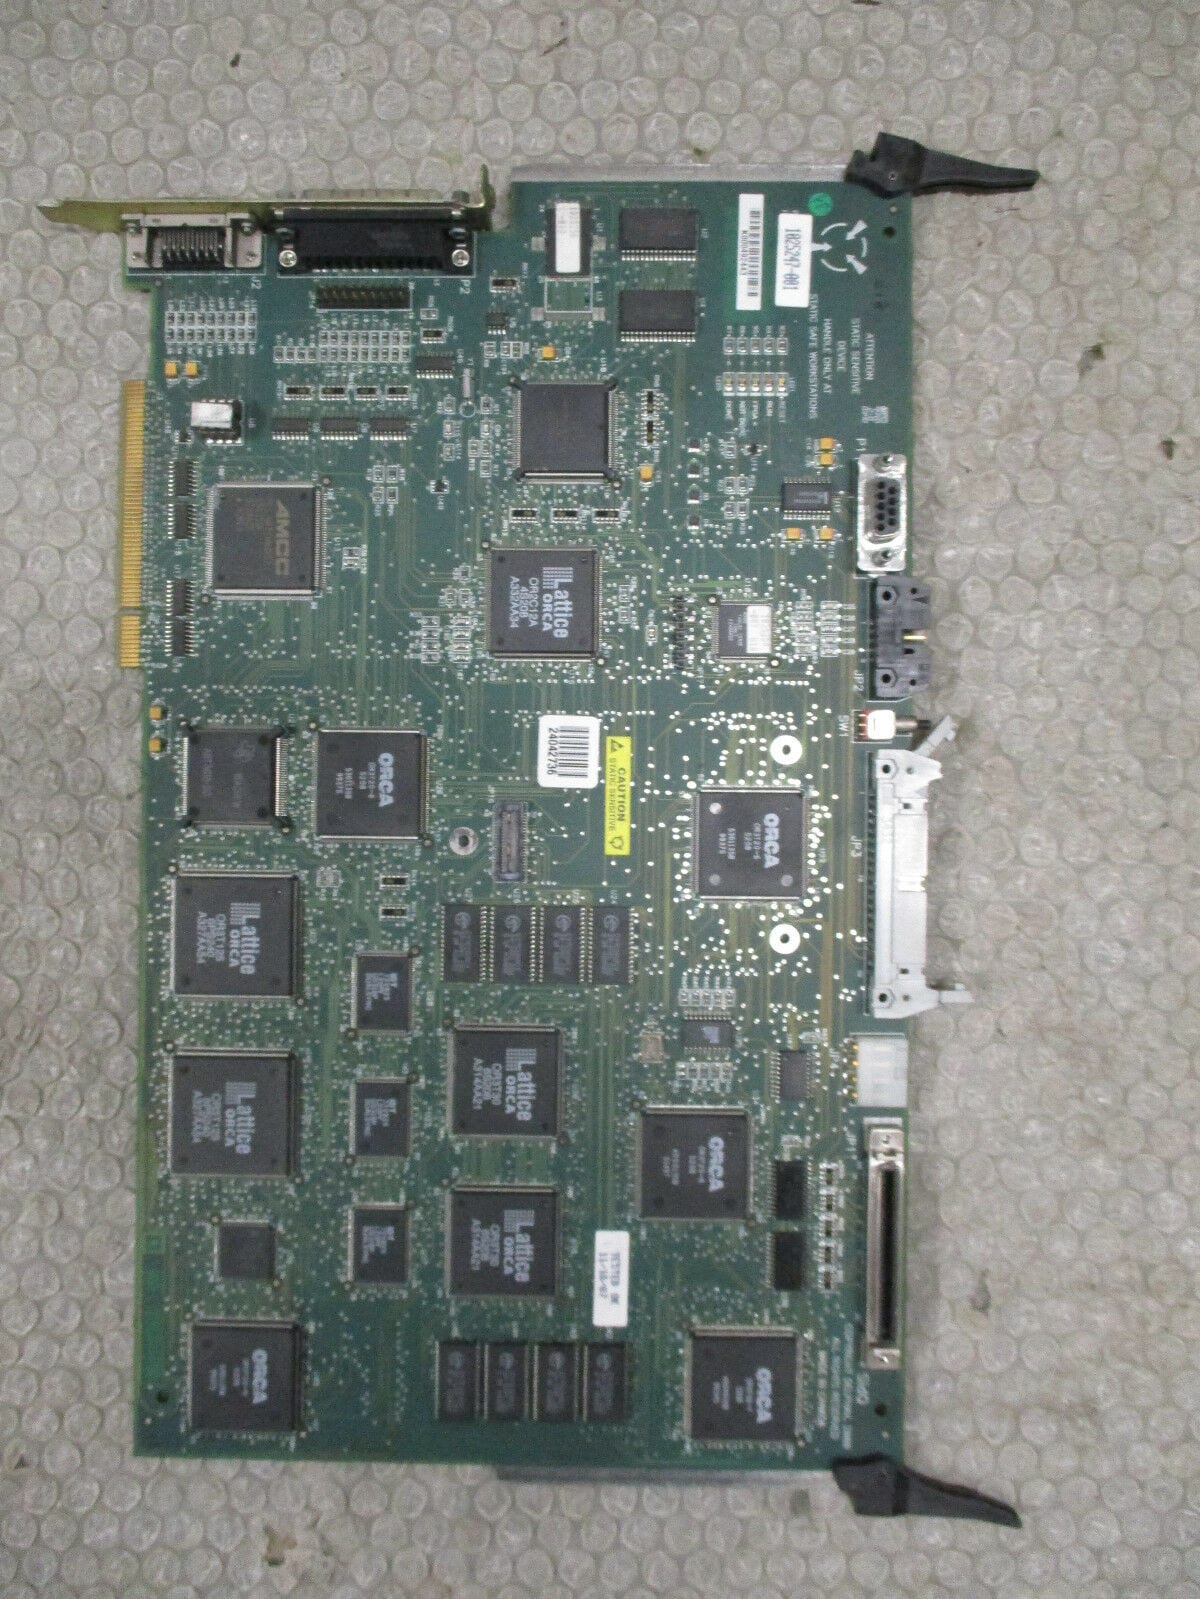 DIVERSIFIED TECHNOLOGY 0125-104178 CIRCUIT BOARD 651200978 PCB CPU 386S NEW $199 